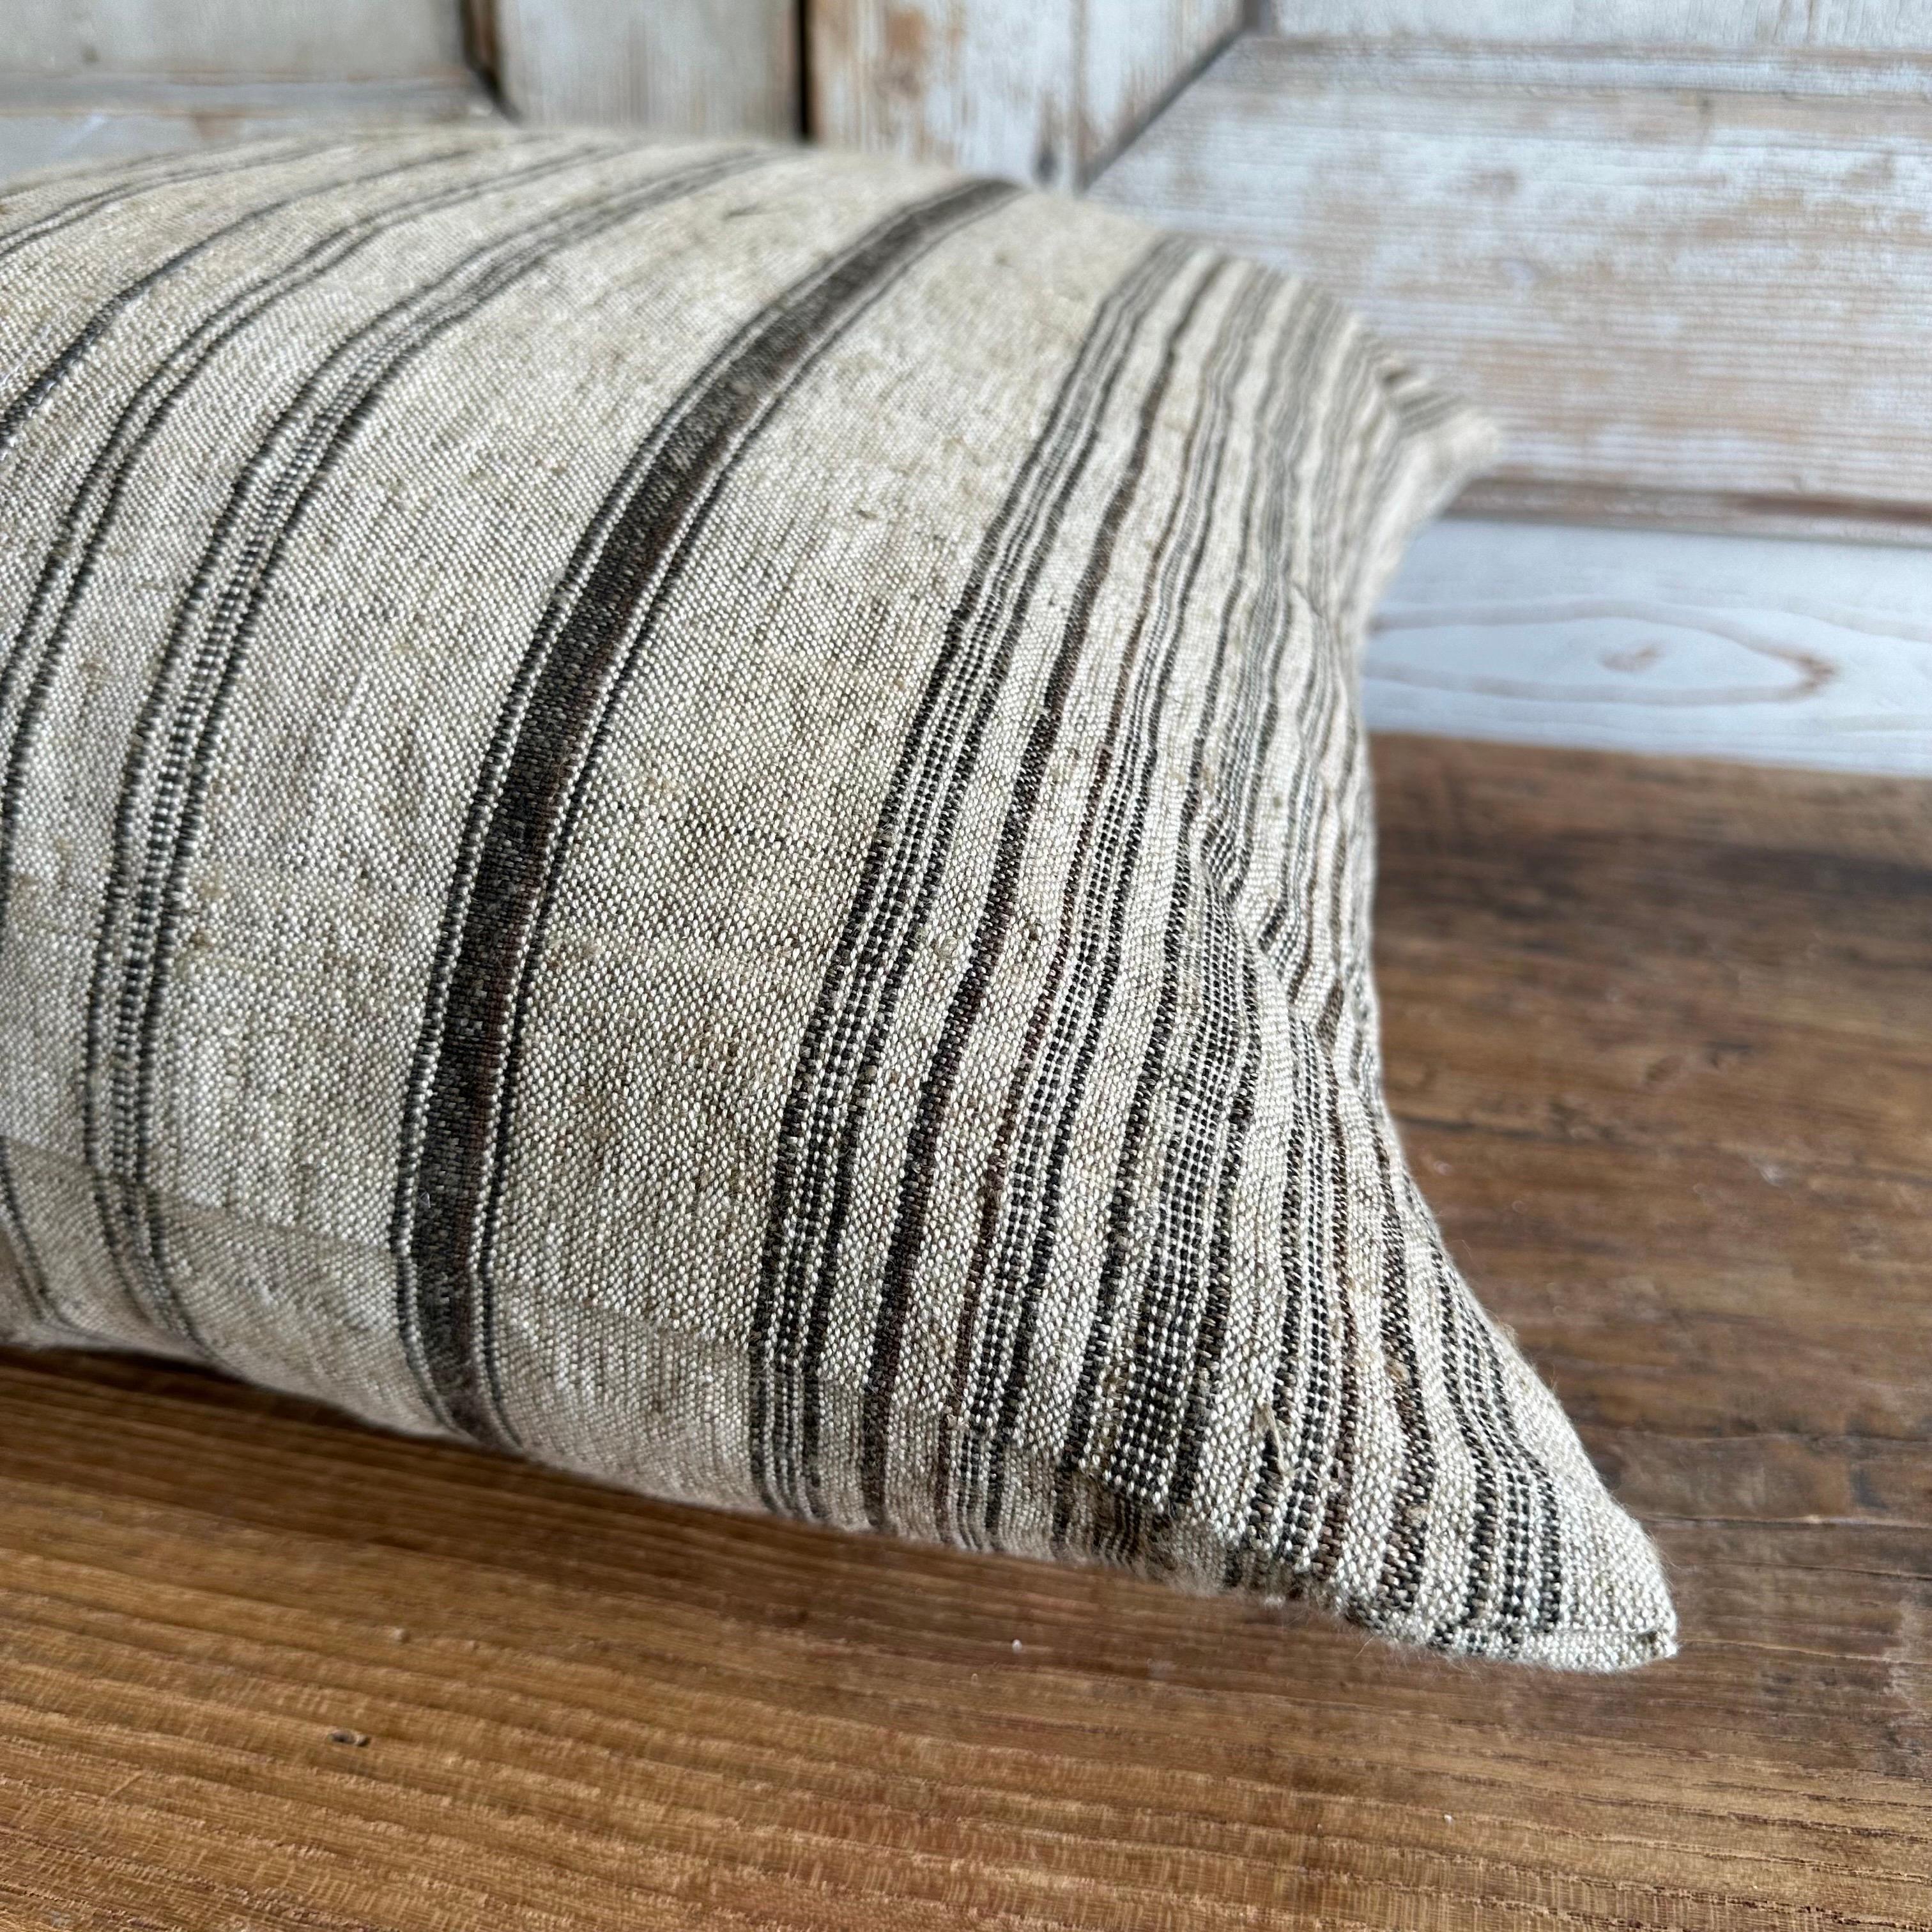 Custom Made Linen Stripe Pillows in Oatmeal with Chocolate Stripes For Sale 3